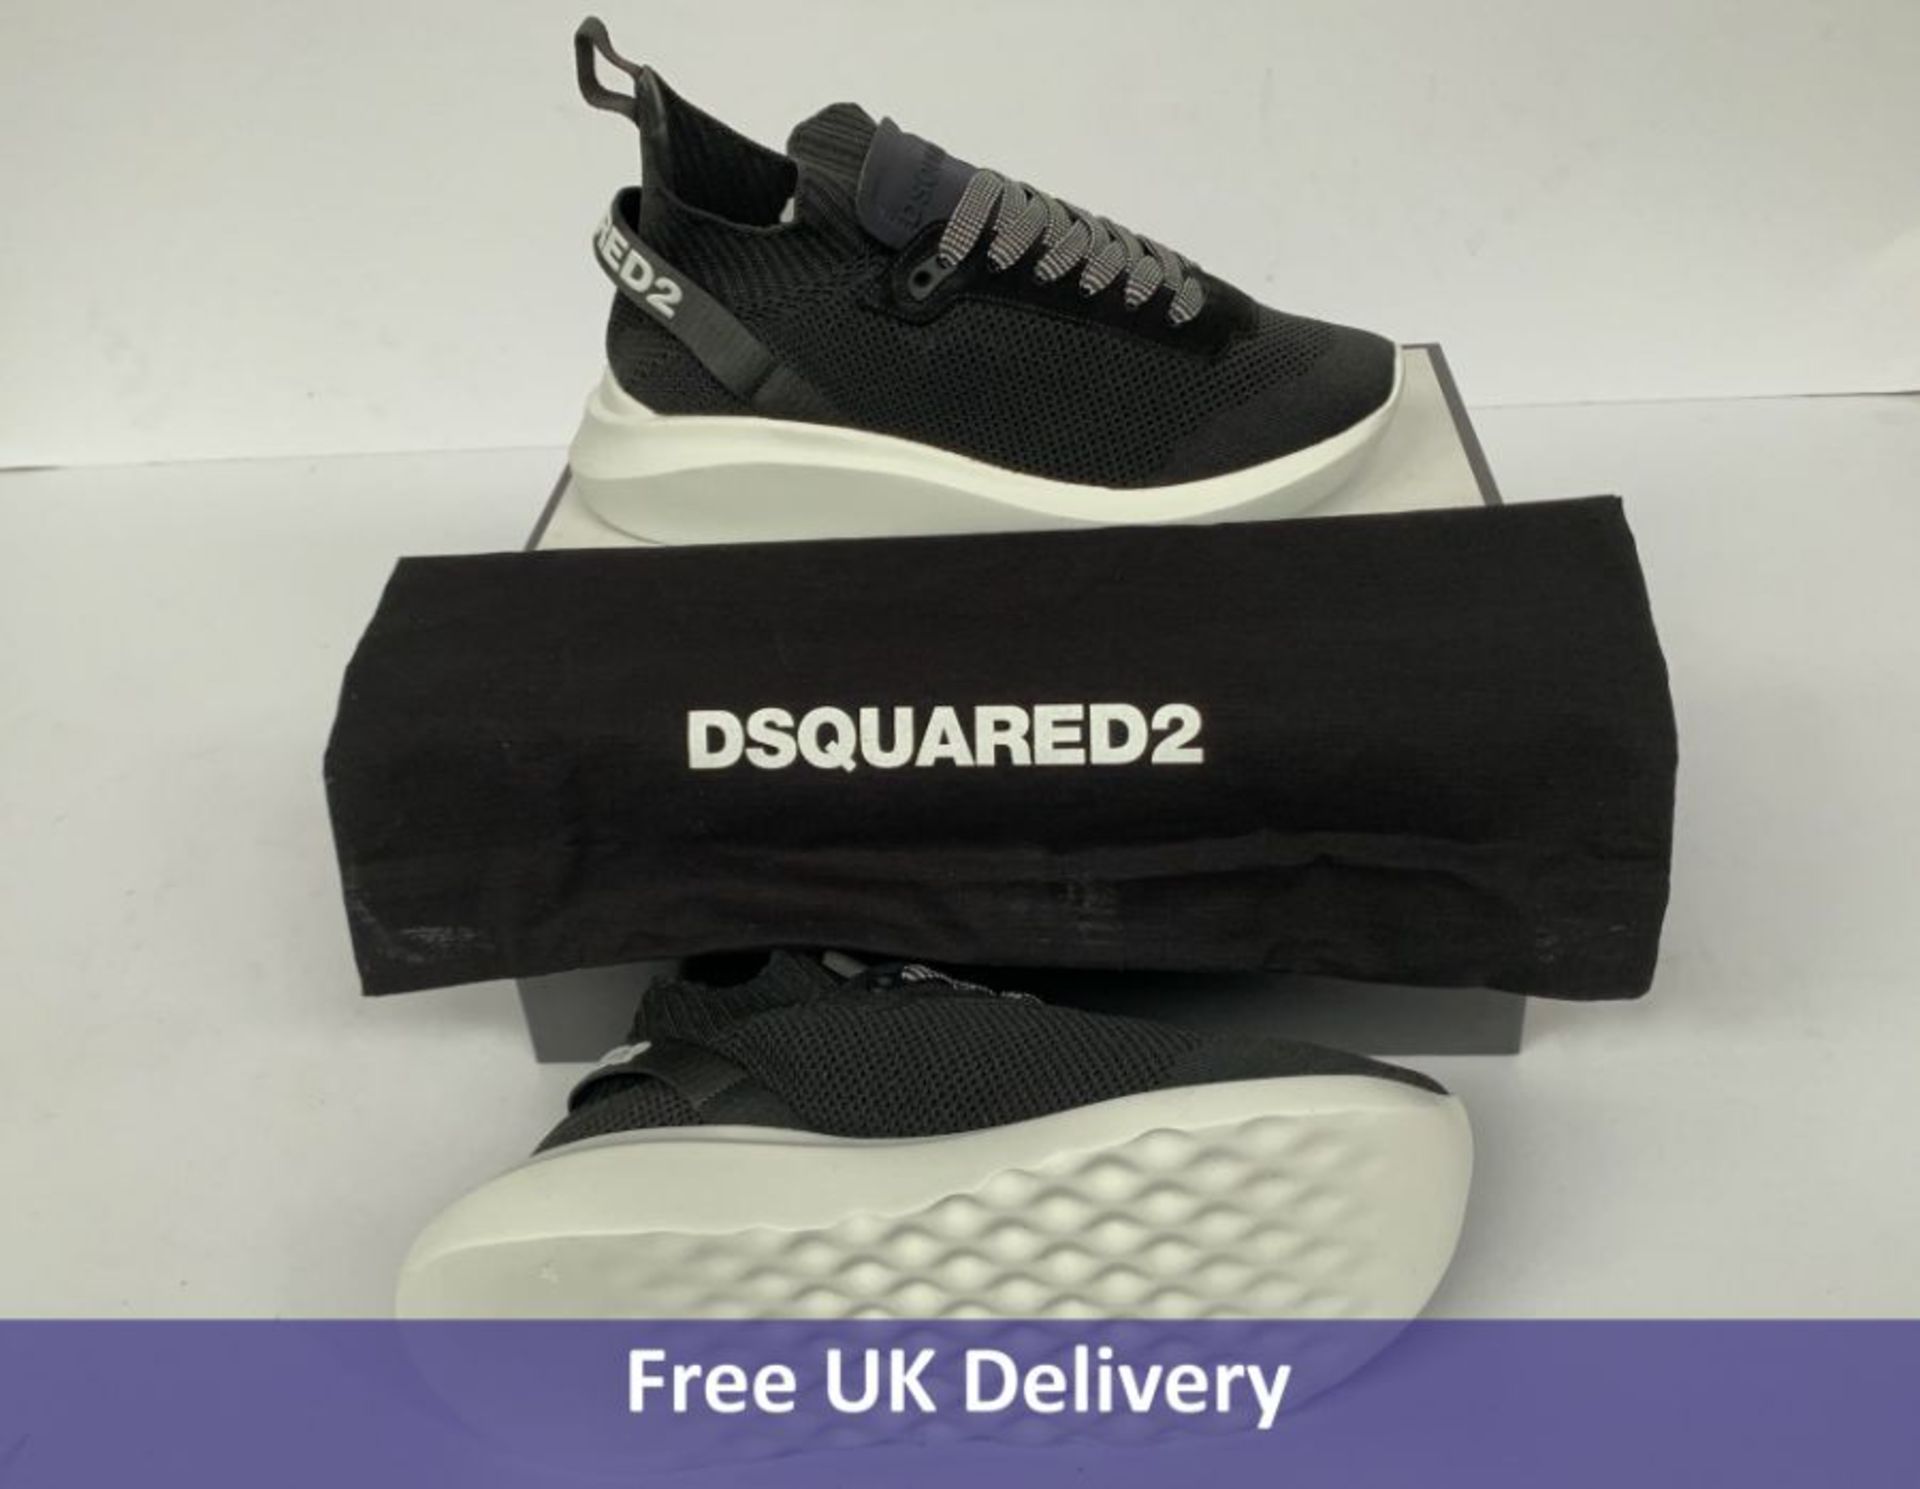 DSquared2 Speedster Sneakers, Black and White, UK 7